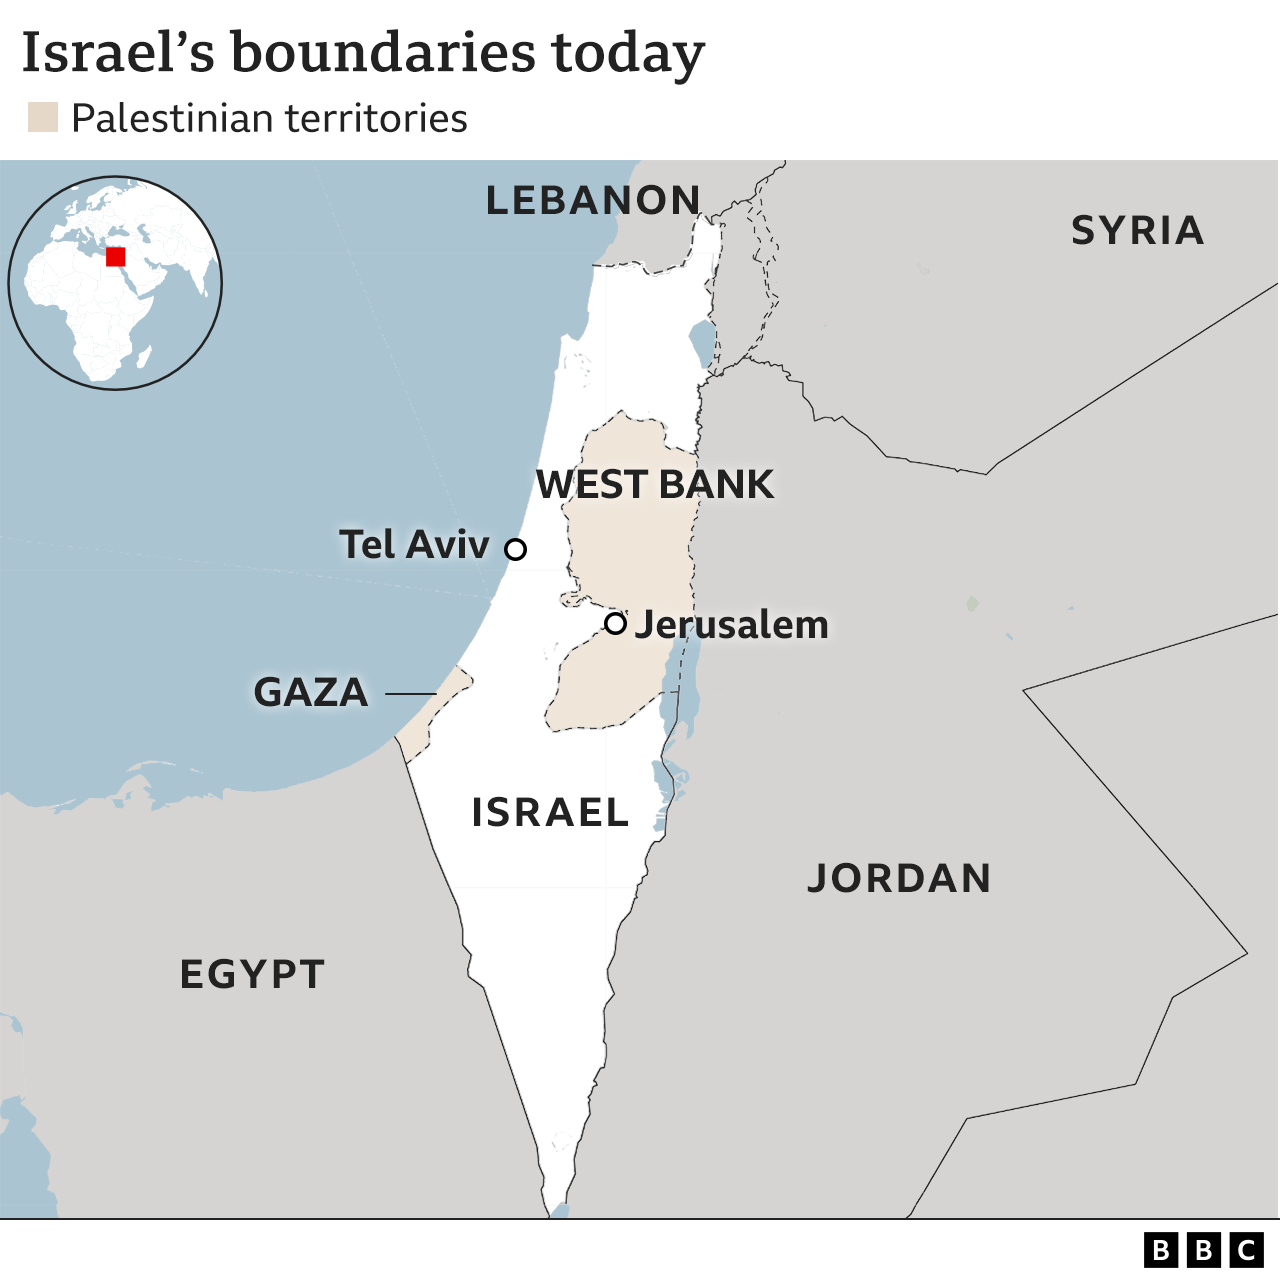 Map showing Israel's boundaries today and Palestinian territories